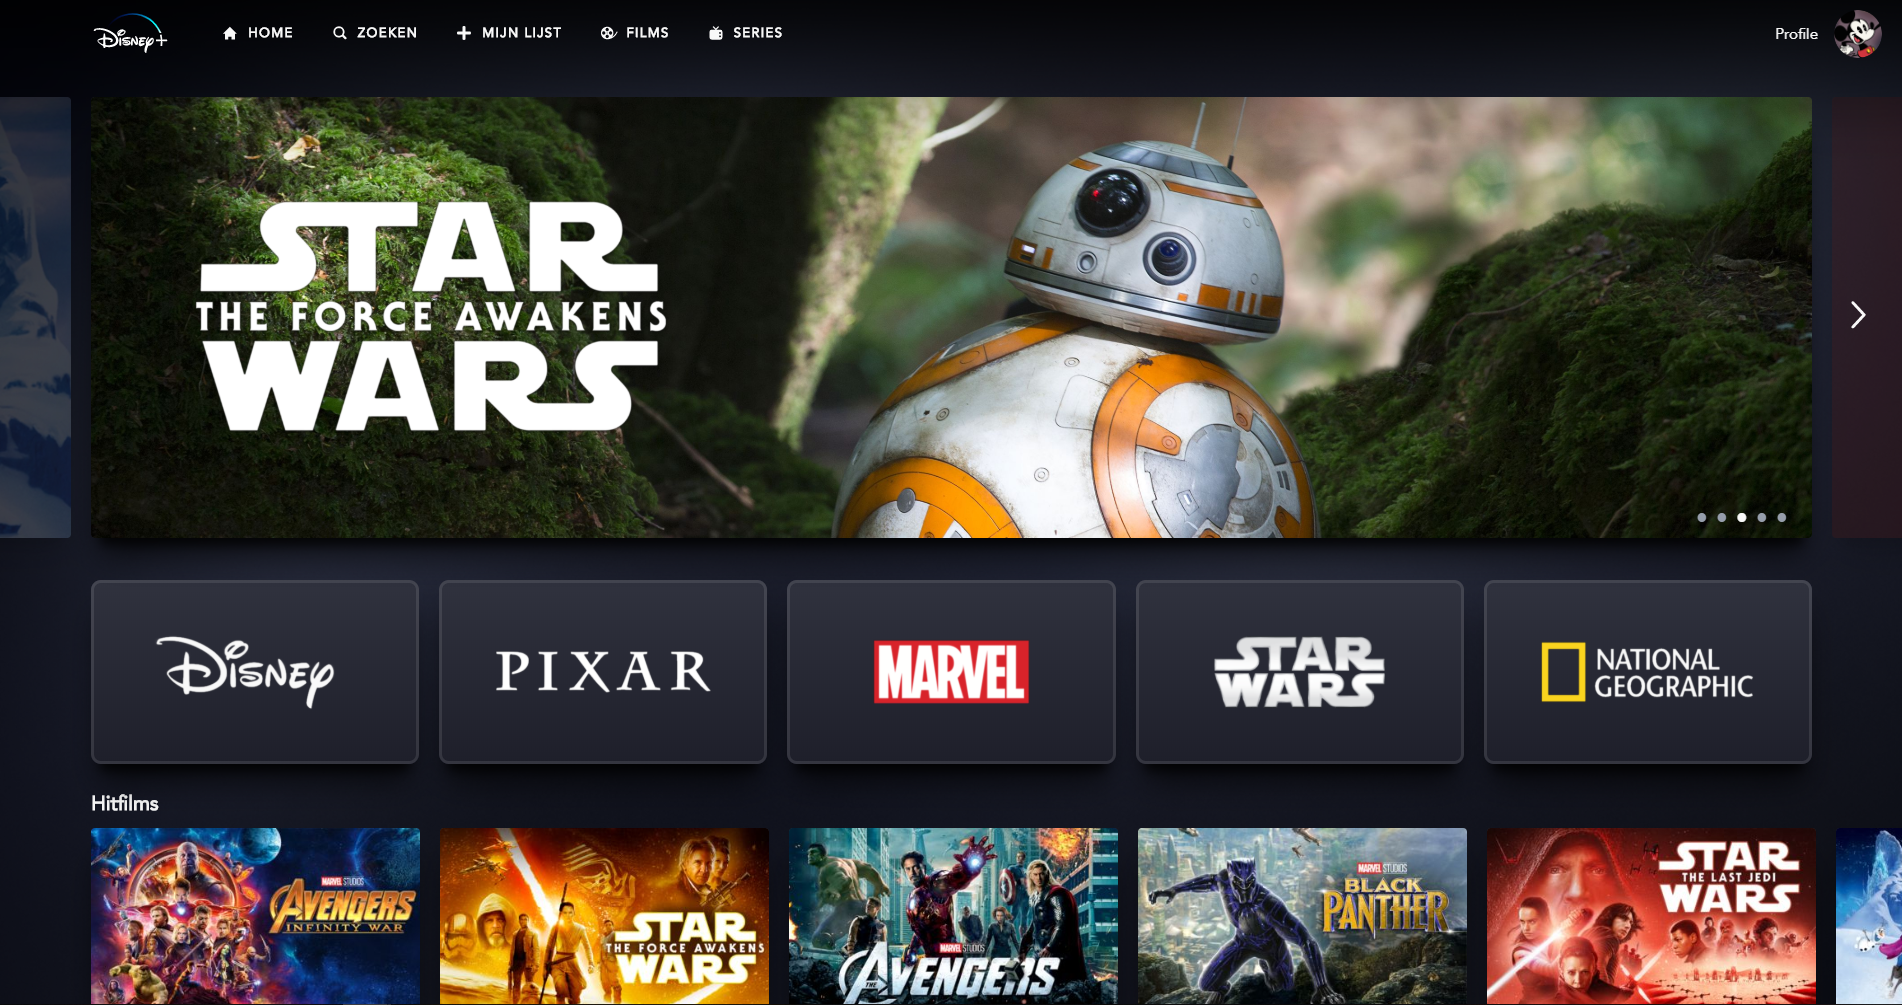 Disney Plus shows are coming to Amazon Prime, in at least one pre